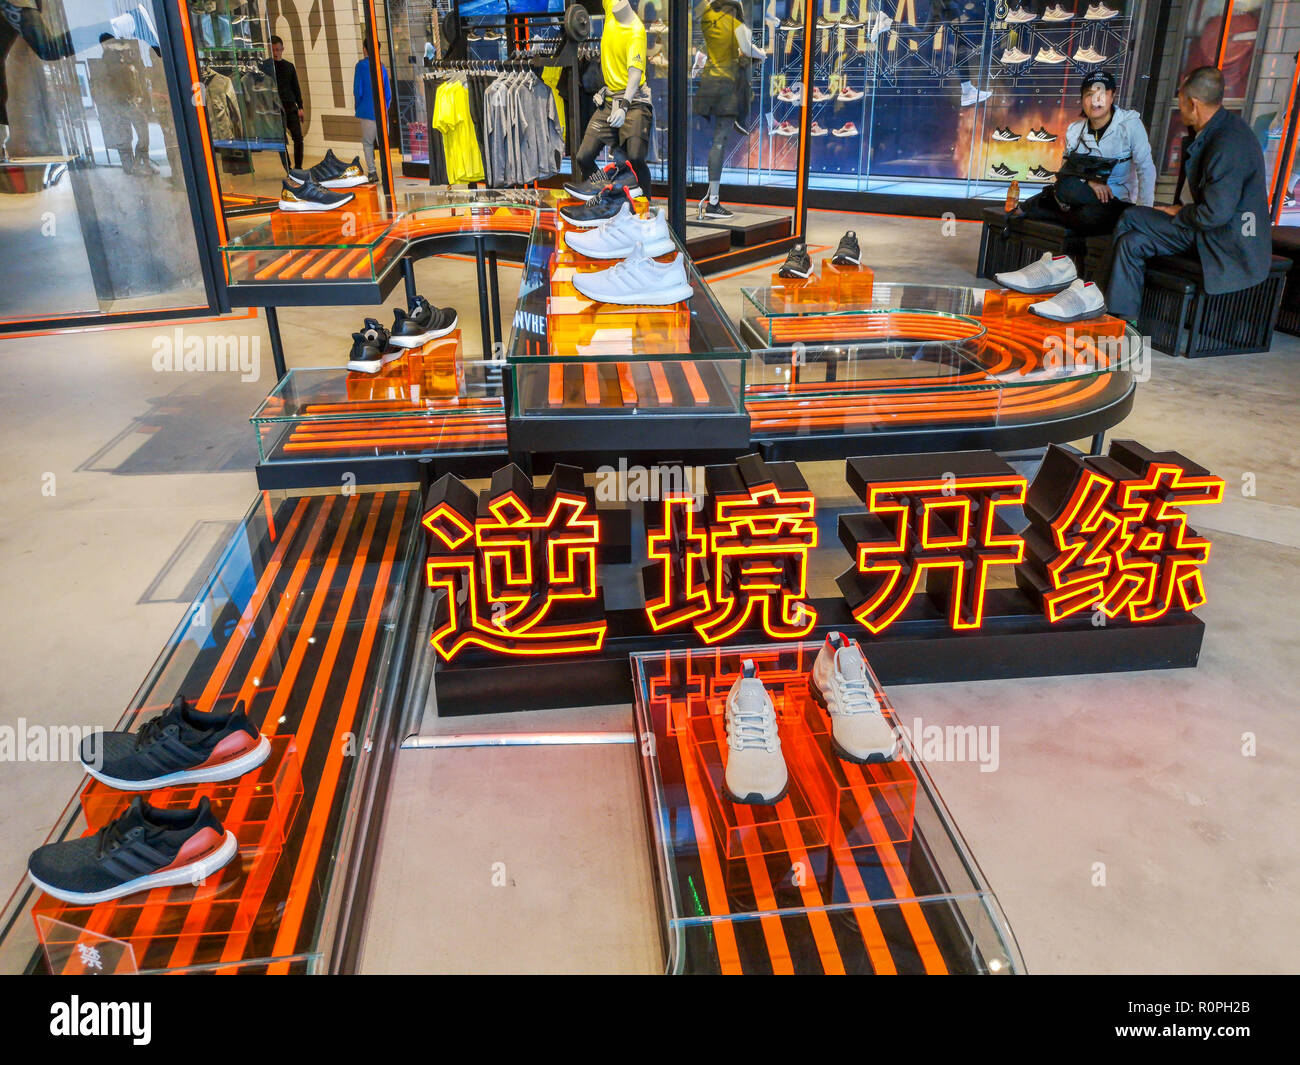 Shanghai, China. 6th Nov, 2018. Clothing and shoes on display at The Adidas Brand Center Adidas Flagship Store opening in Shanghai. Credit: SIPA Asia/ZUMA Wire/Alamy Live News Stock Photo